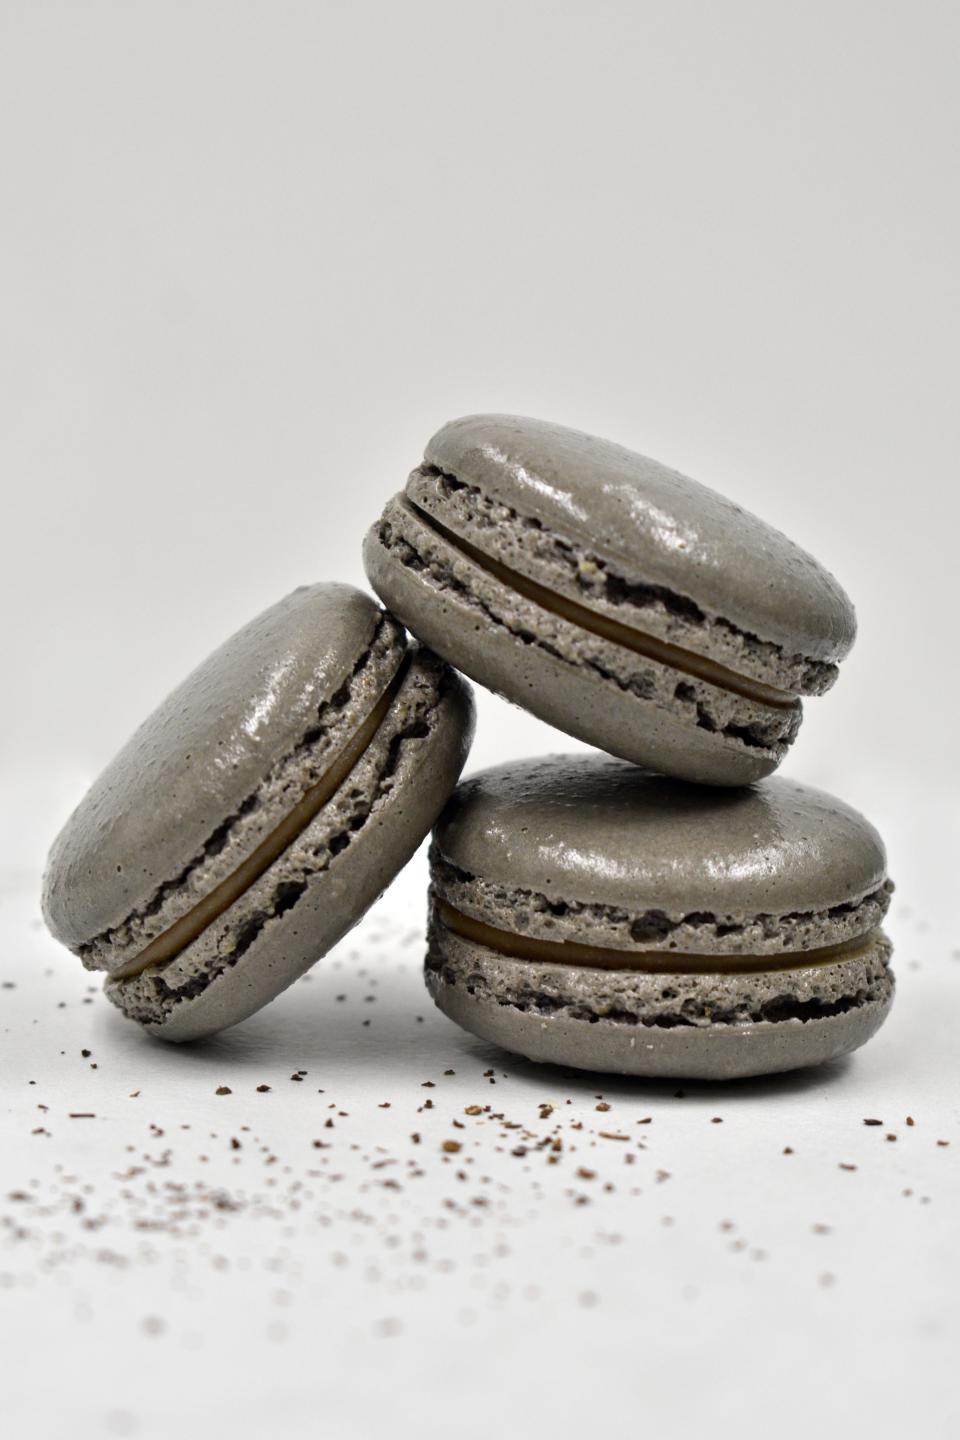 These Earl Grey macarons pair well with a cup of tea.